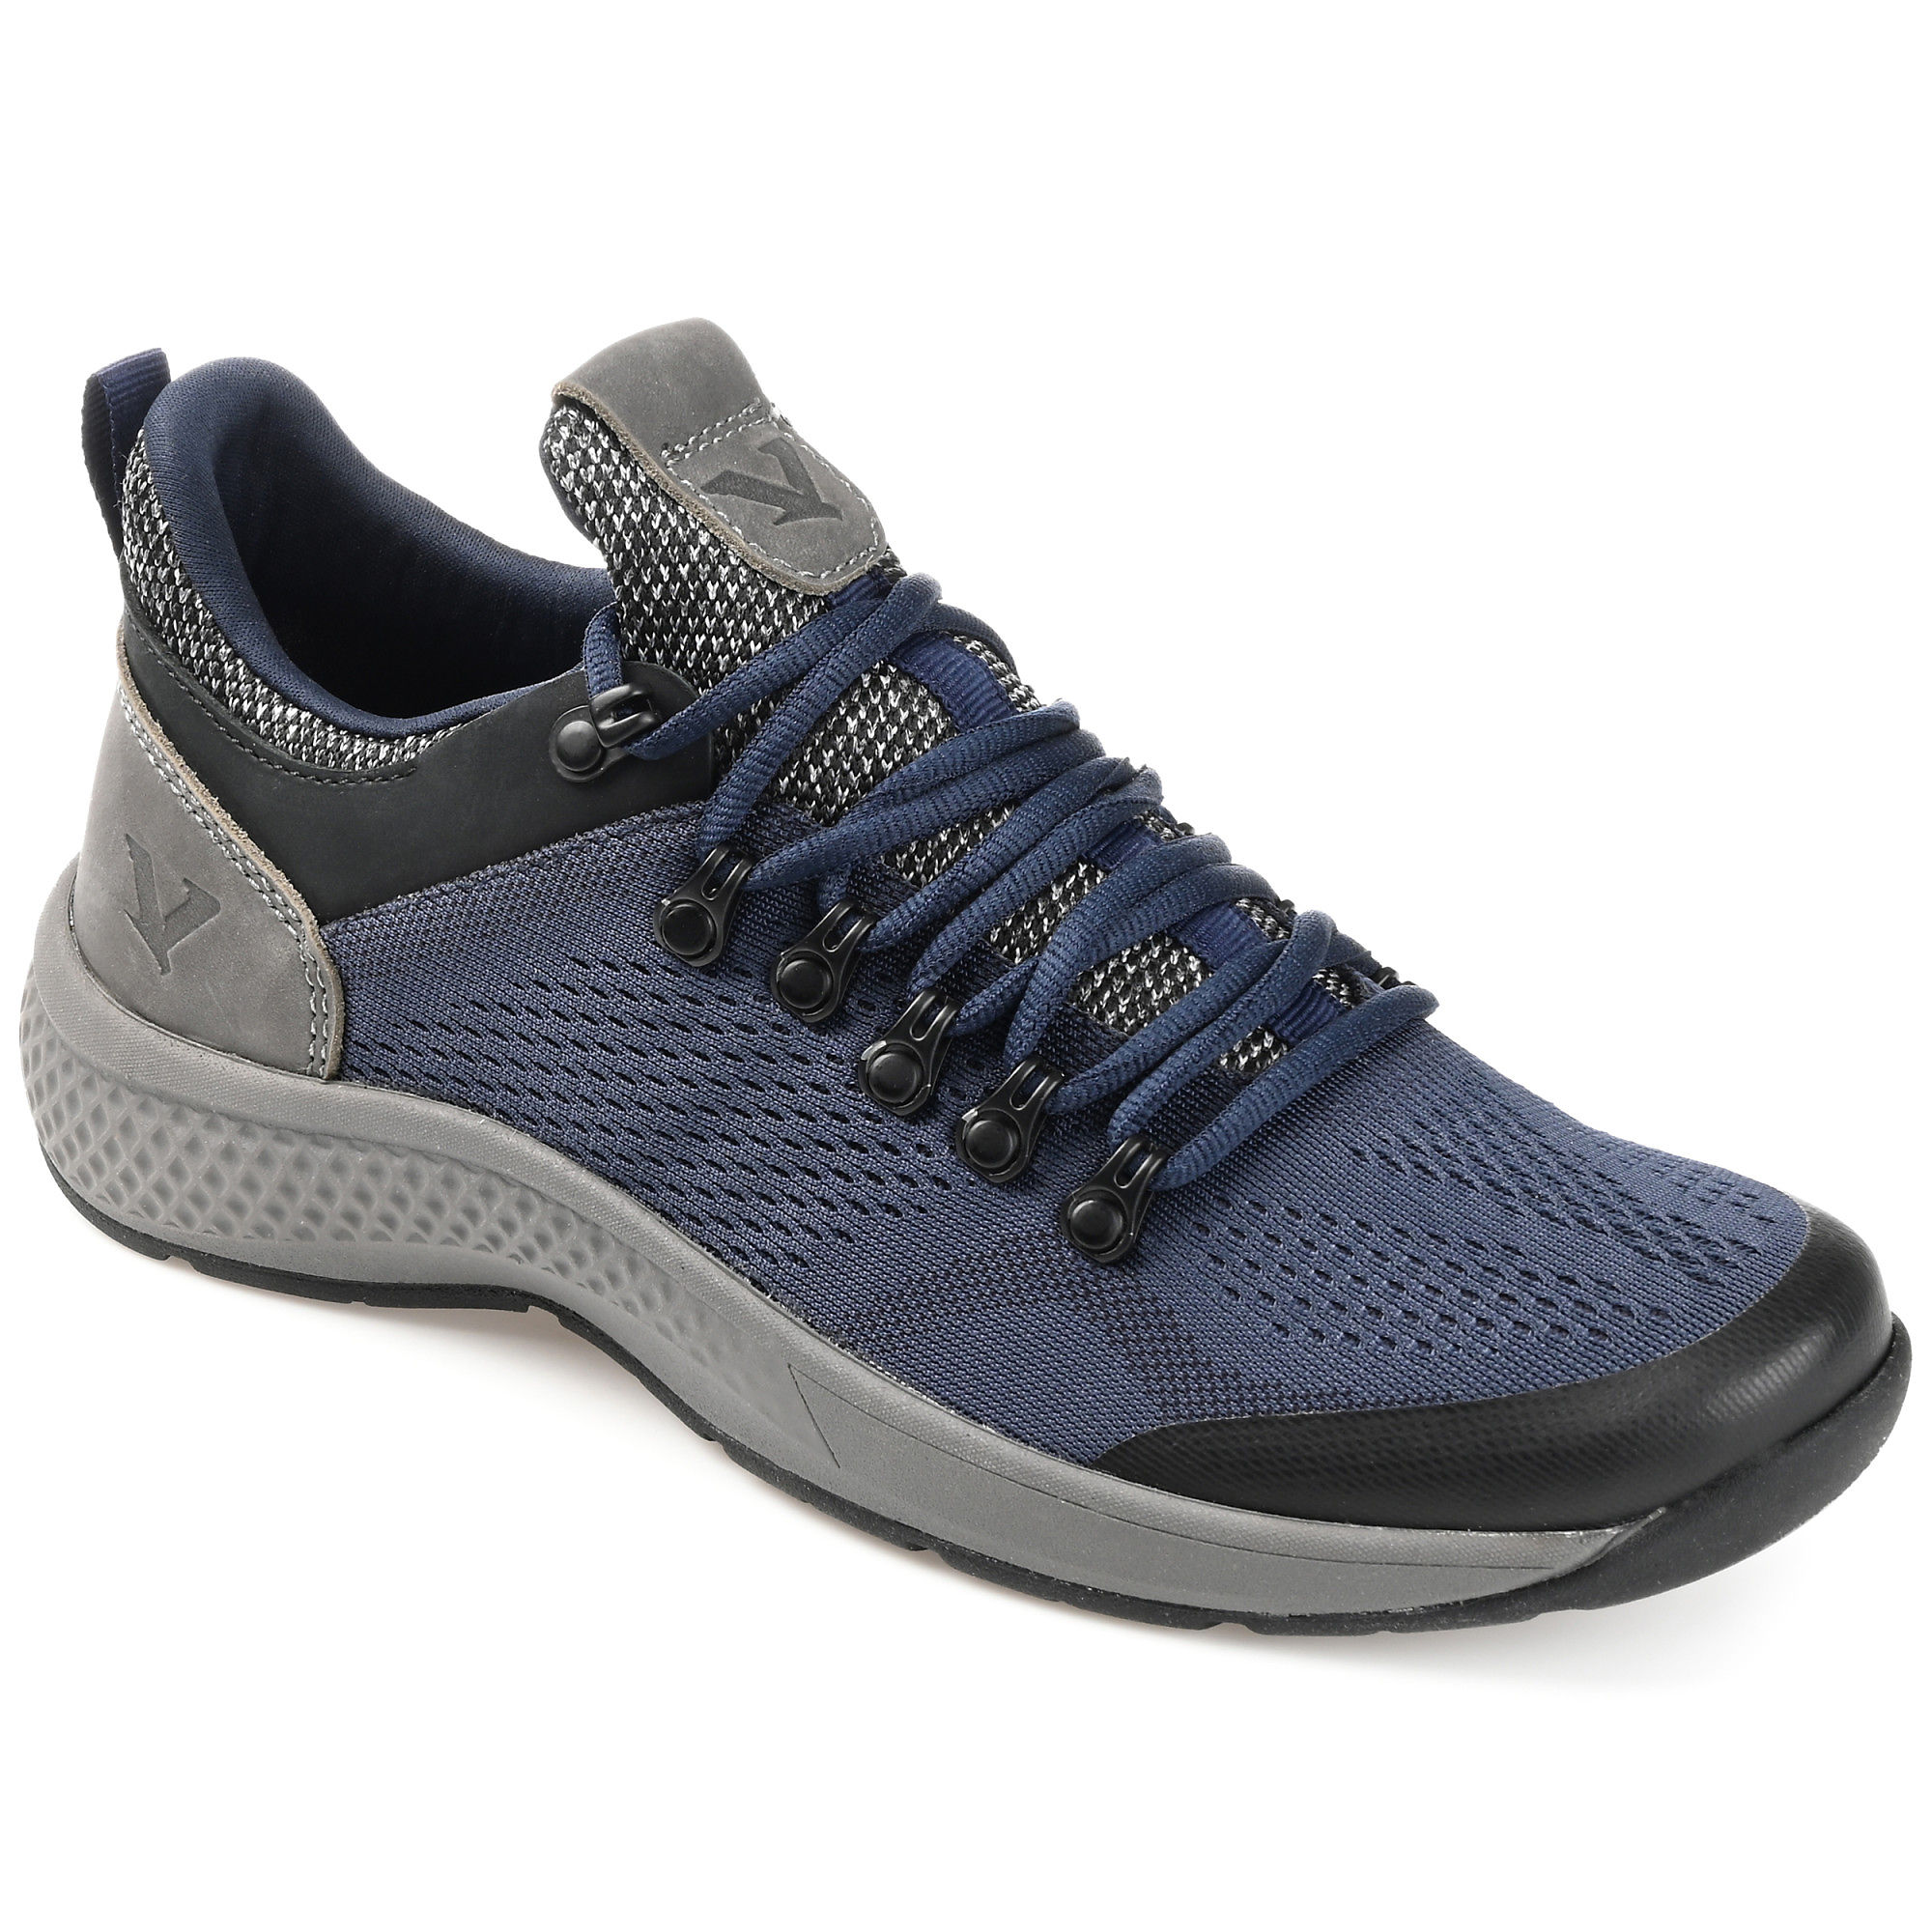 Lands End Territory Men's Crag Casual Knit Trail Sneakers